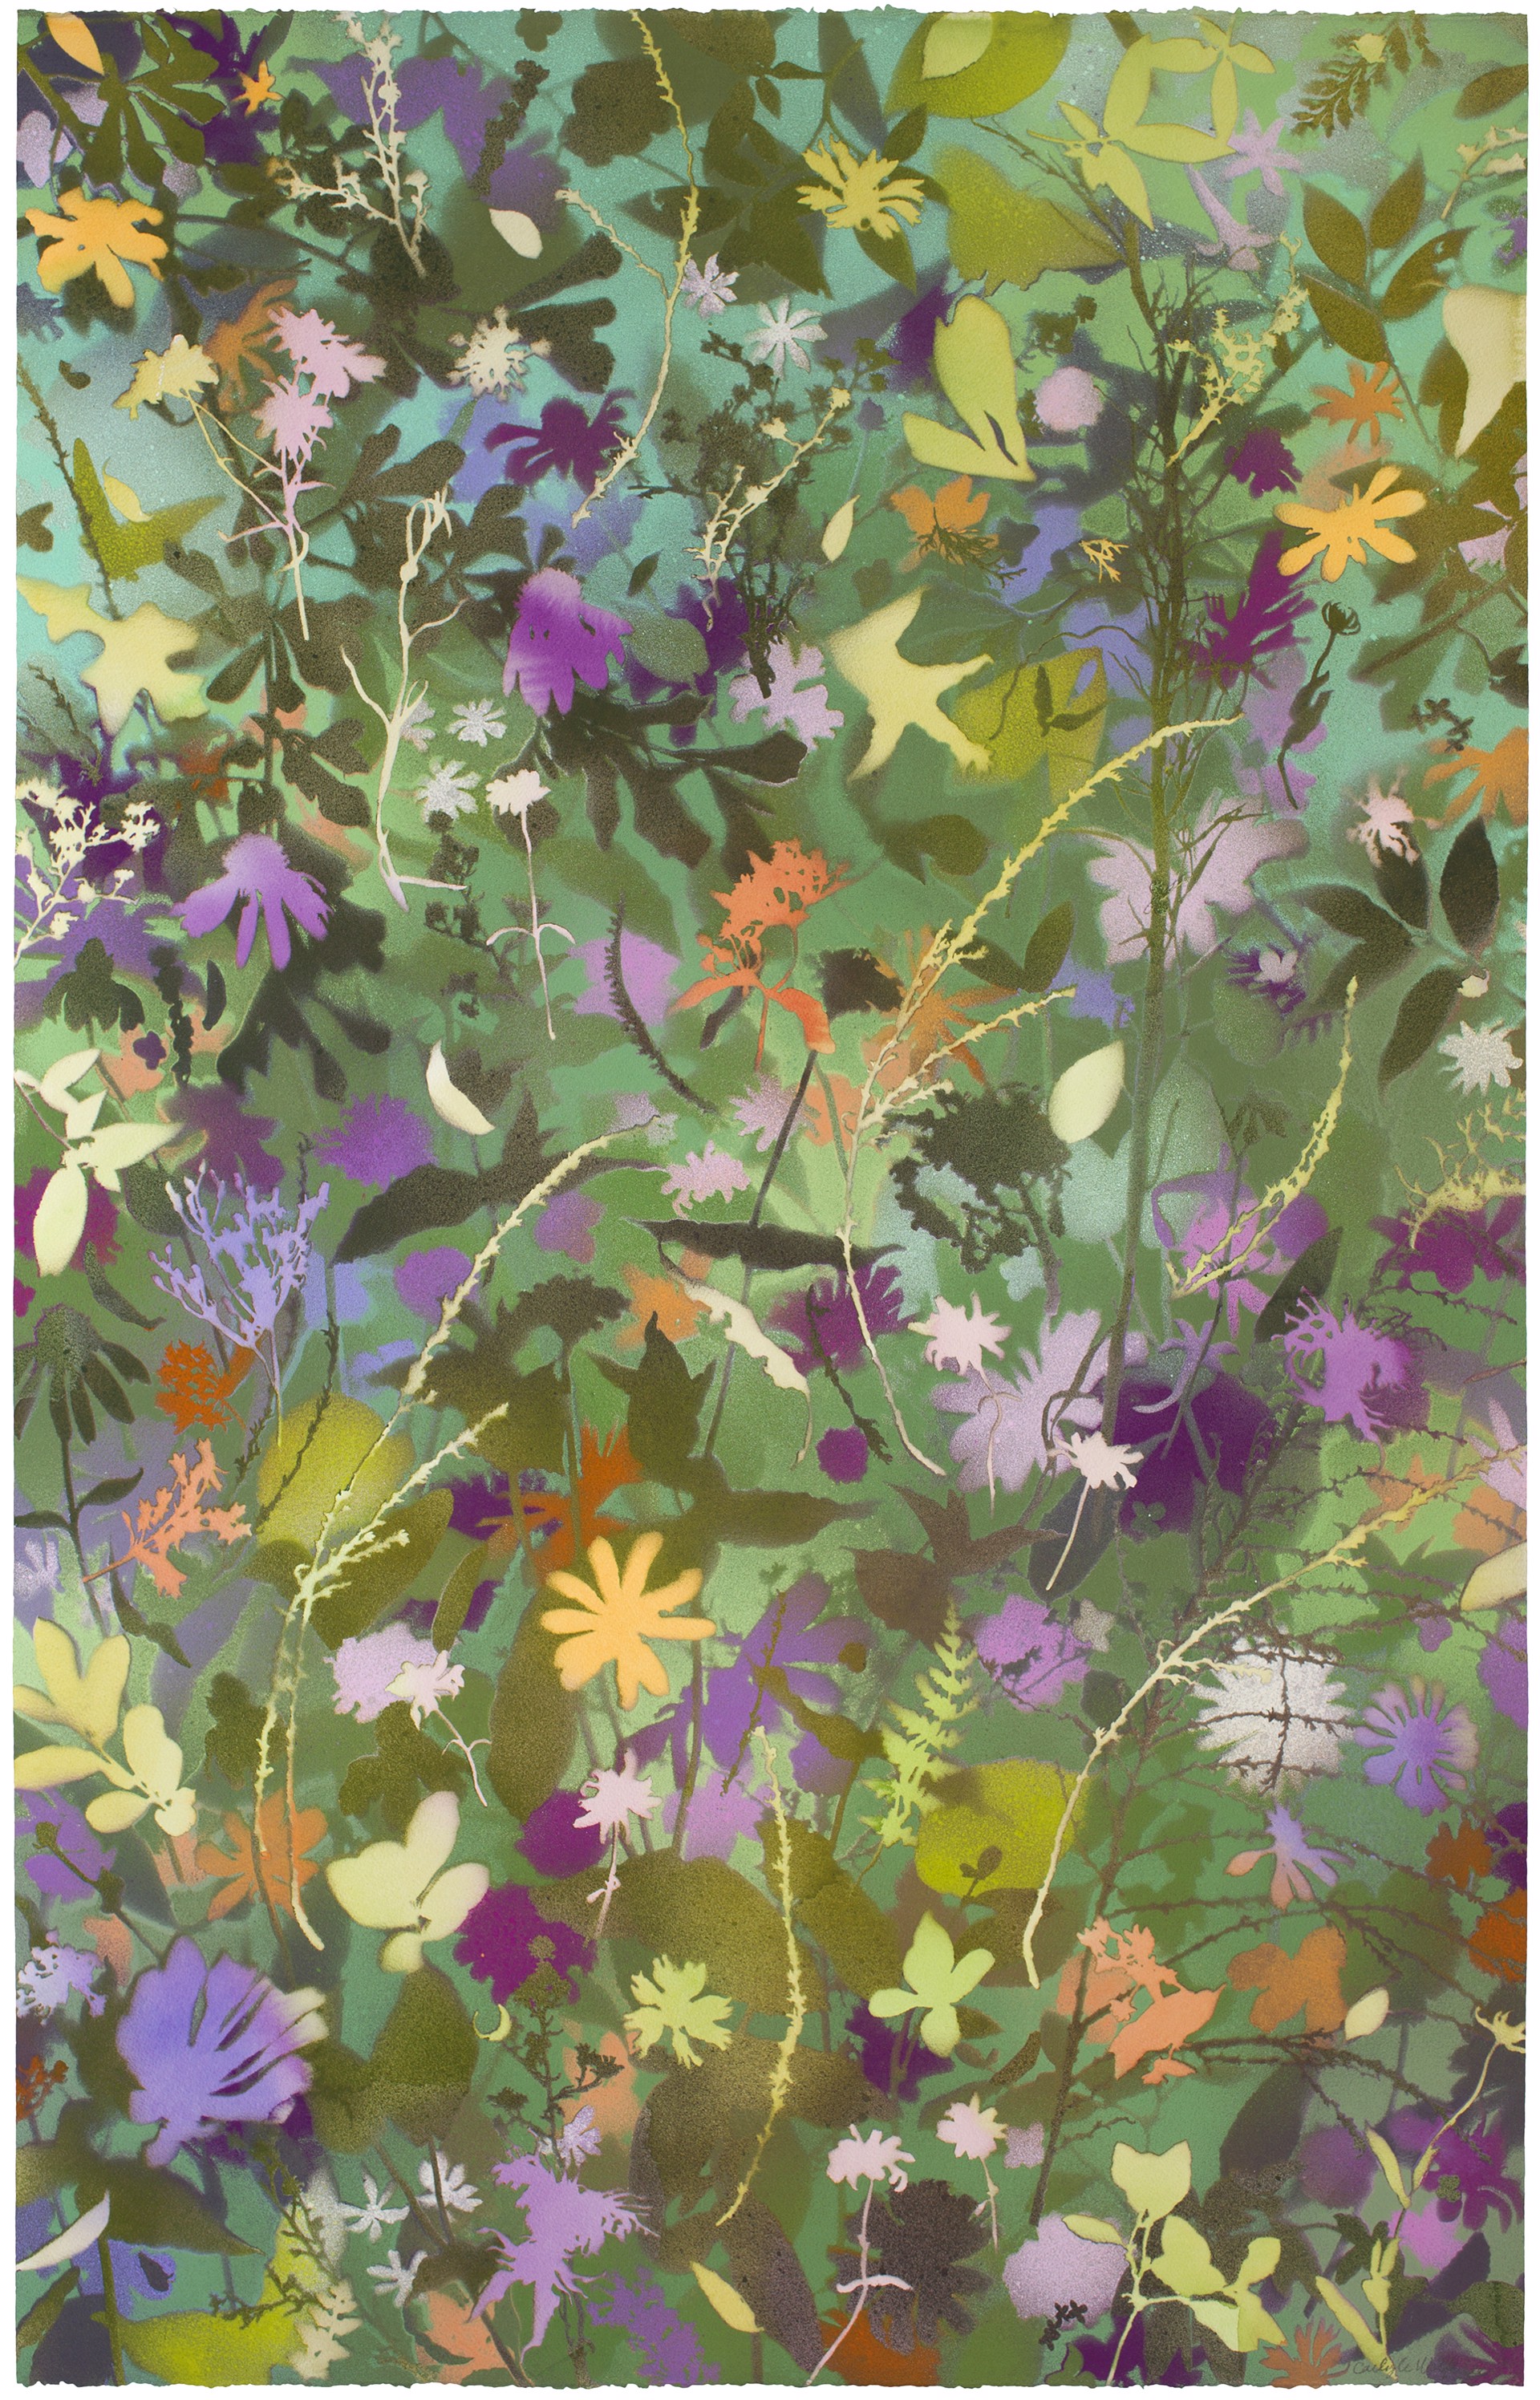 Anniversary Wildflowers I by Carlyle Wolfe Lee